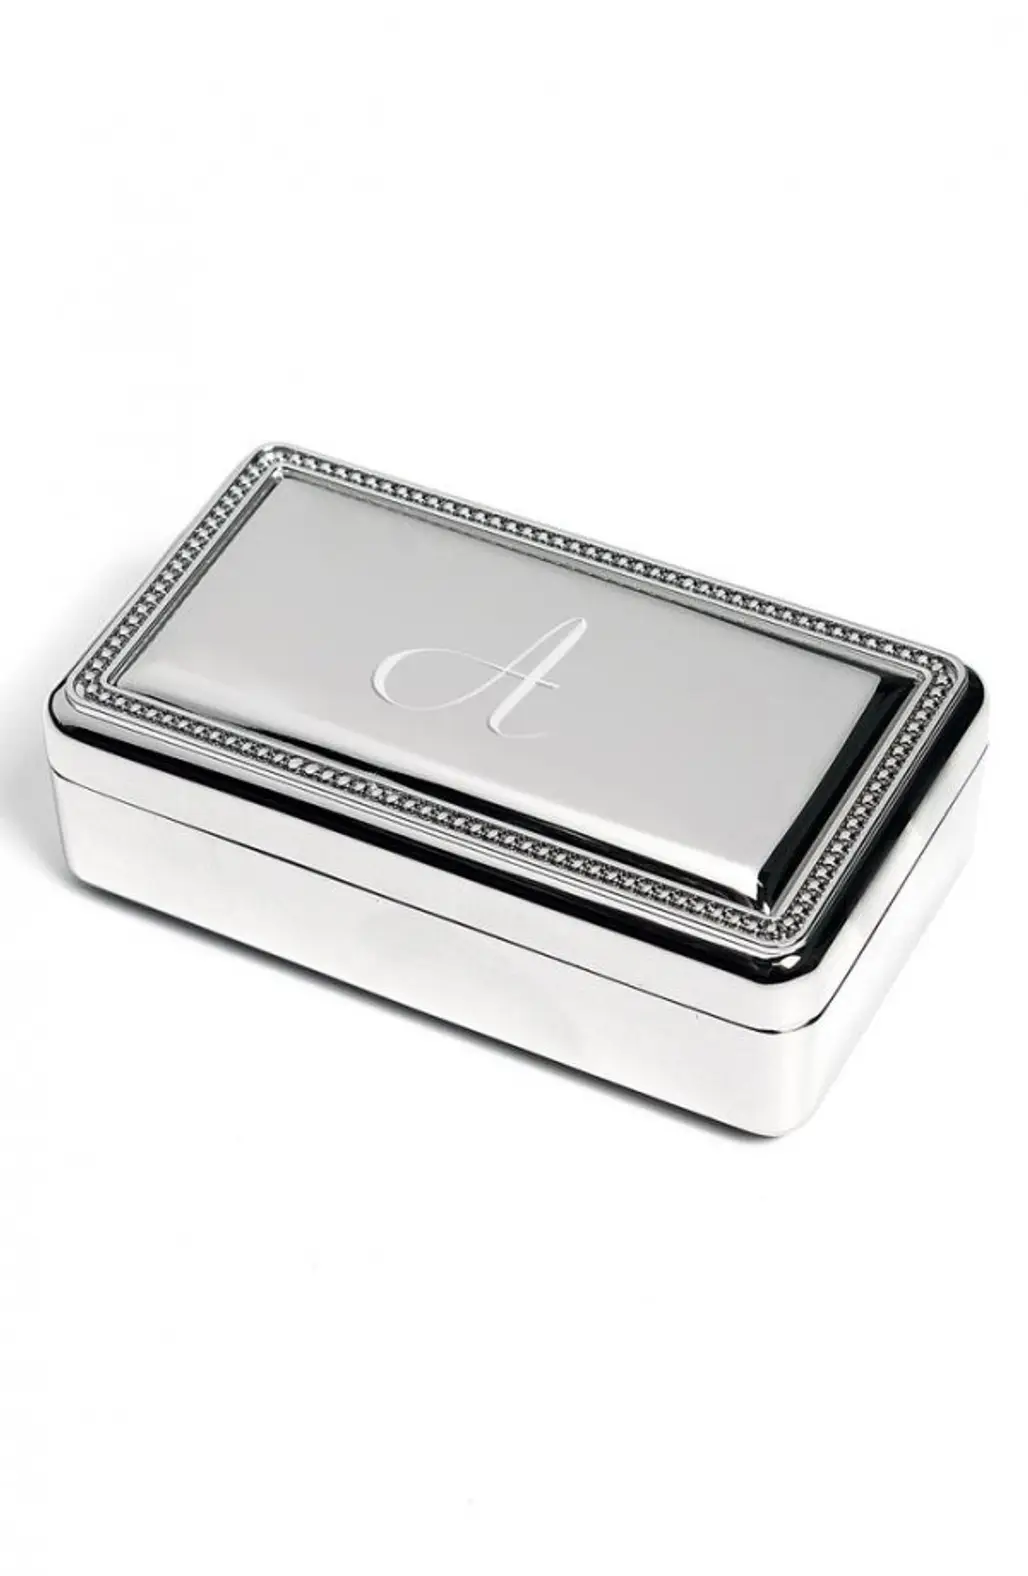 product, silver, rectangle, metal, technology,